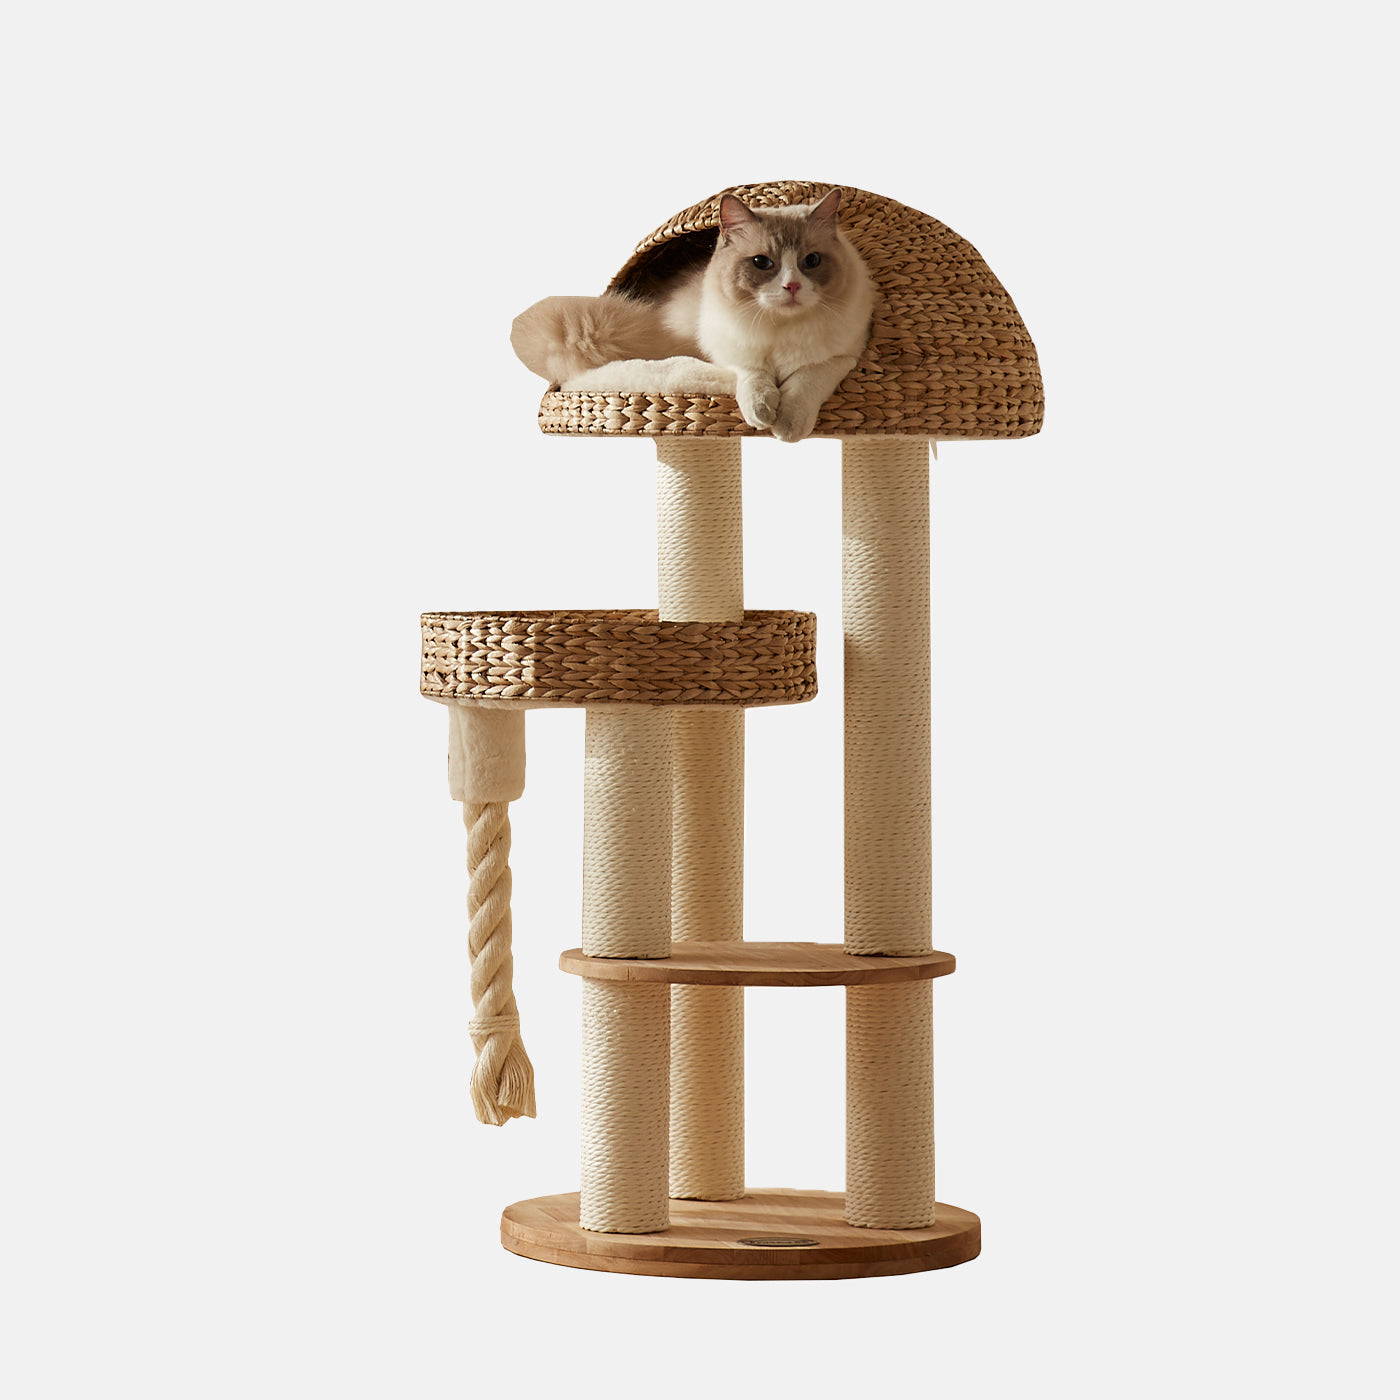 Discover our Luxury Helsinki The Dome Cat Tree. The Perfect Cat Tree For The Ultimate Cat Fun! Featuring Three Scratch Posts, Complete With A Beautiful Wicker & Dome Design! Available Now at Lords & Labradors US